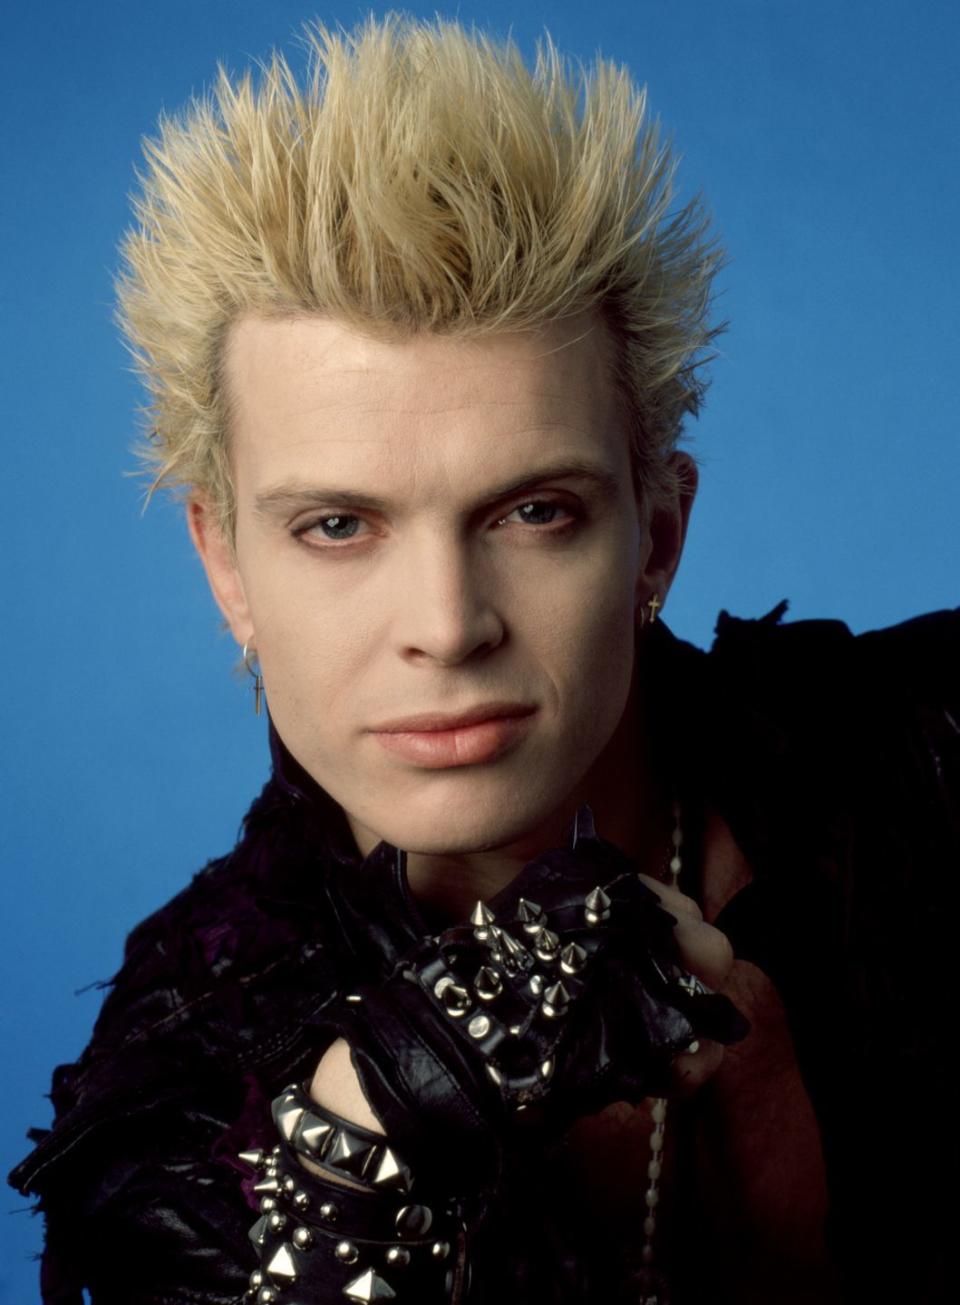 <p>Interestingly enough, punk was also popular in the late '80s. As a result, seeing dyed and spiky hair on the street (perhaps next to someone rocking a "pretty boy" cut) became common. Billy Idol was an icon amongst punk fans.</p>